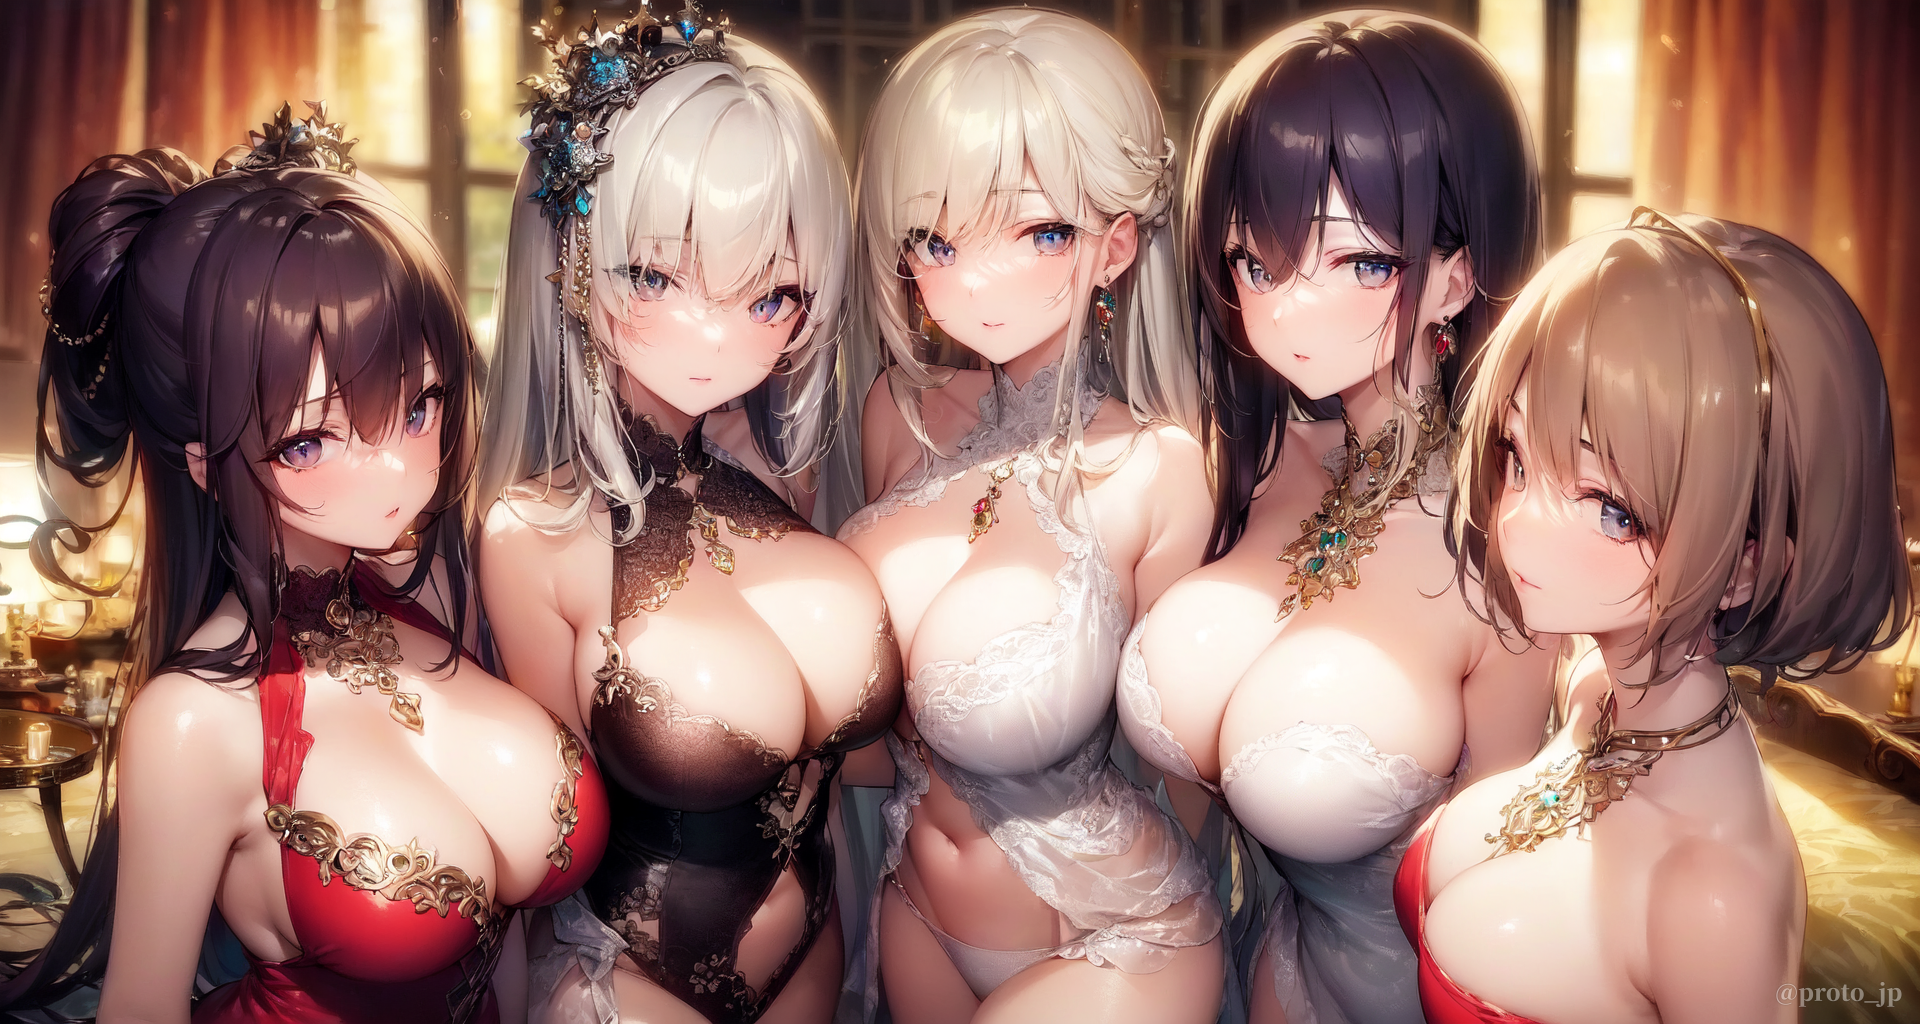 Anime 1920x1024 anime anime girls Stable Diffusion AI art original characters artwork digital art lingerie cleavage big boobs looking at viewer line-up group of women long hair boobs lined up text Pixiv